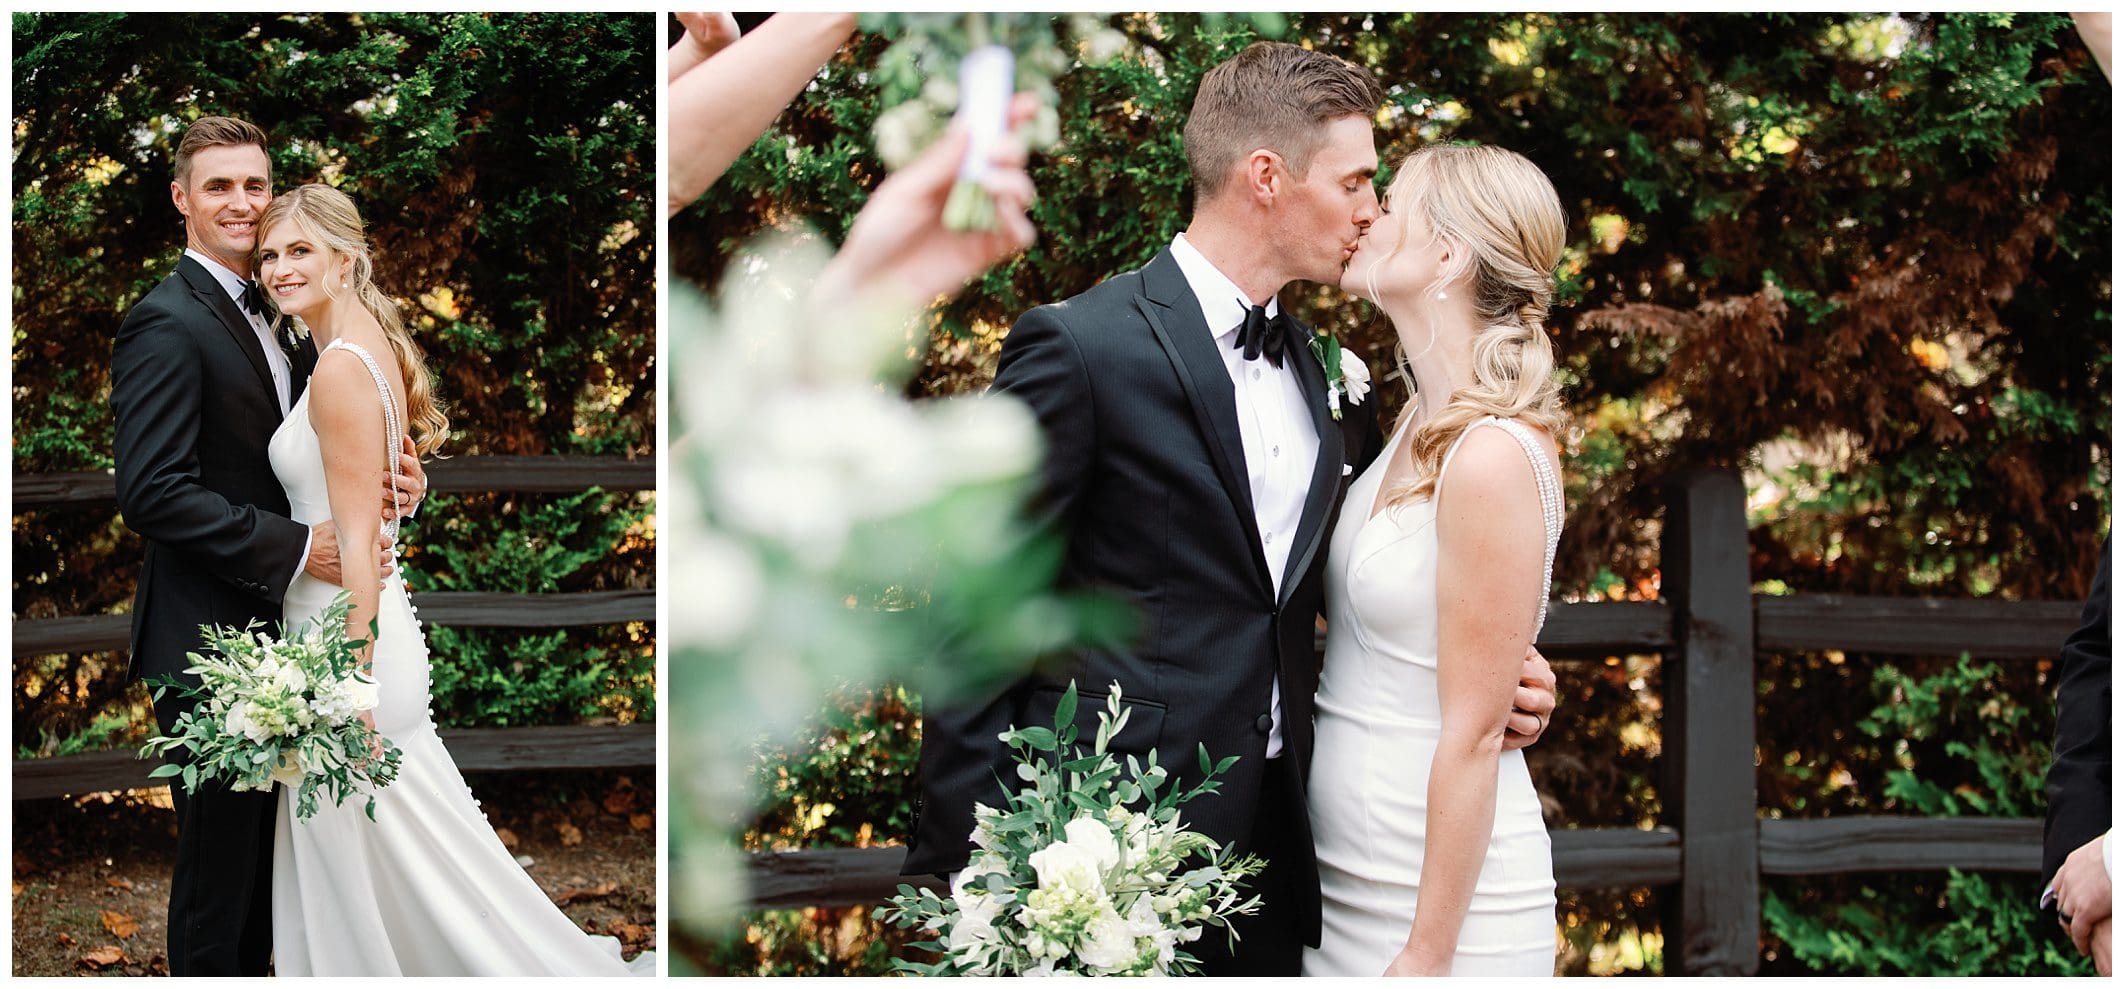 A fall wedding couple sharing a romantic kiss in front of lush bushes at Crest Center.